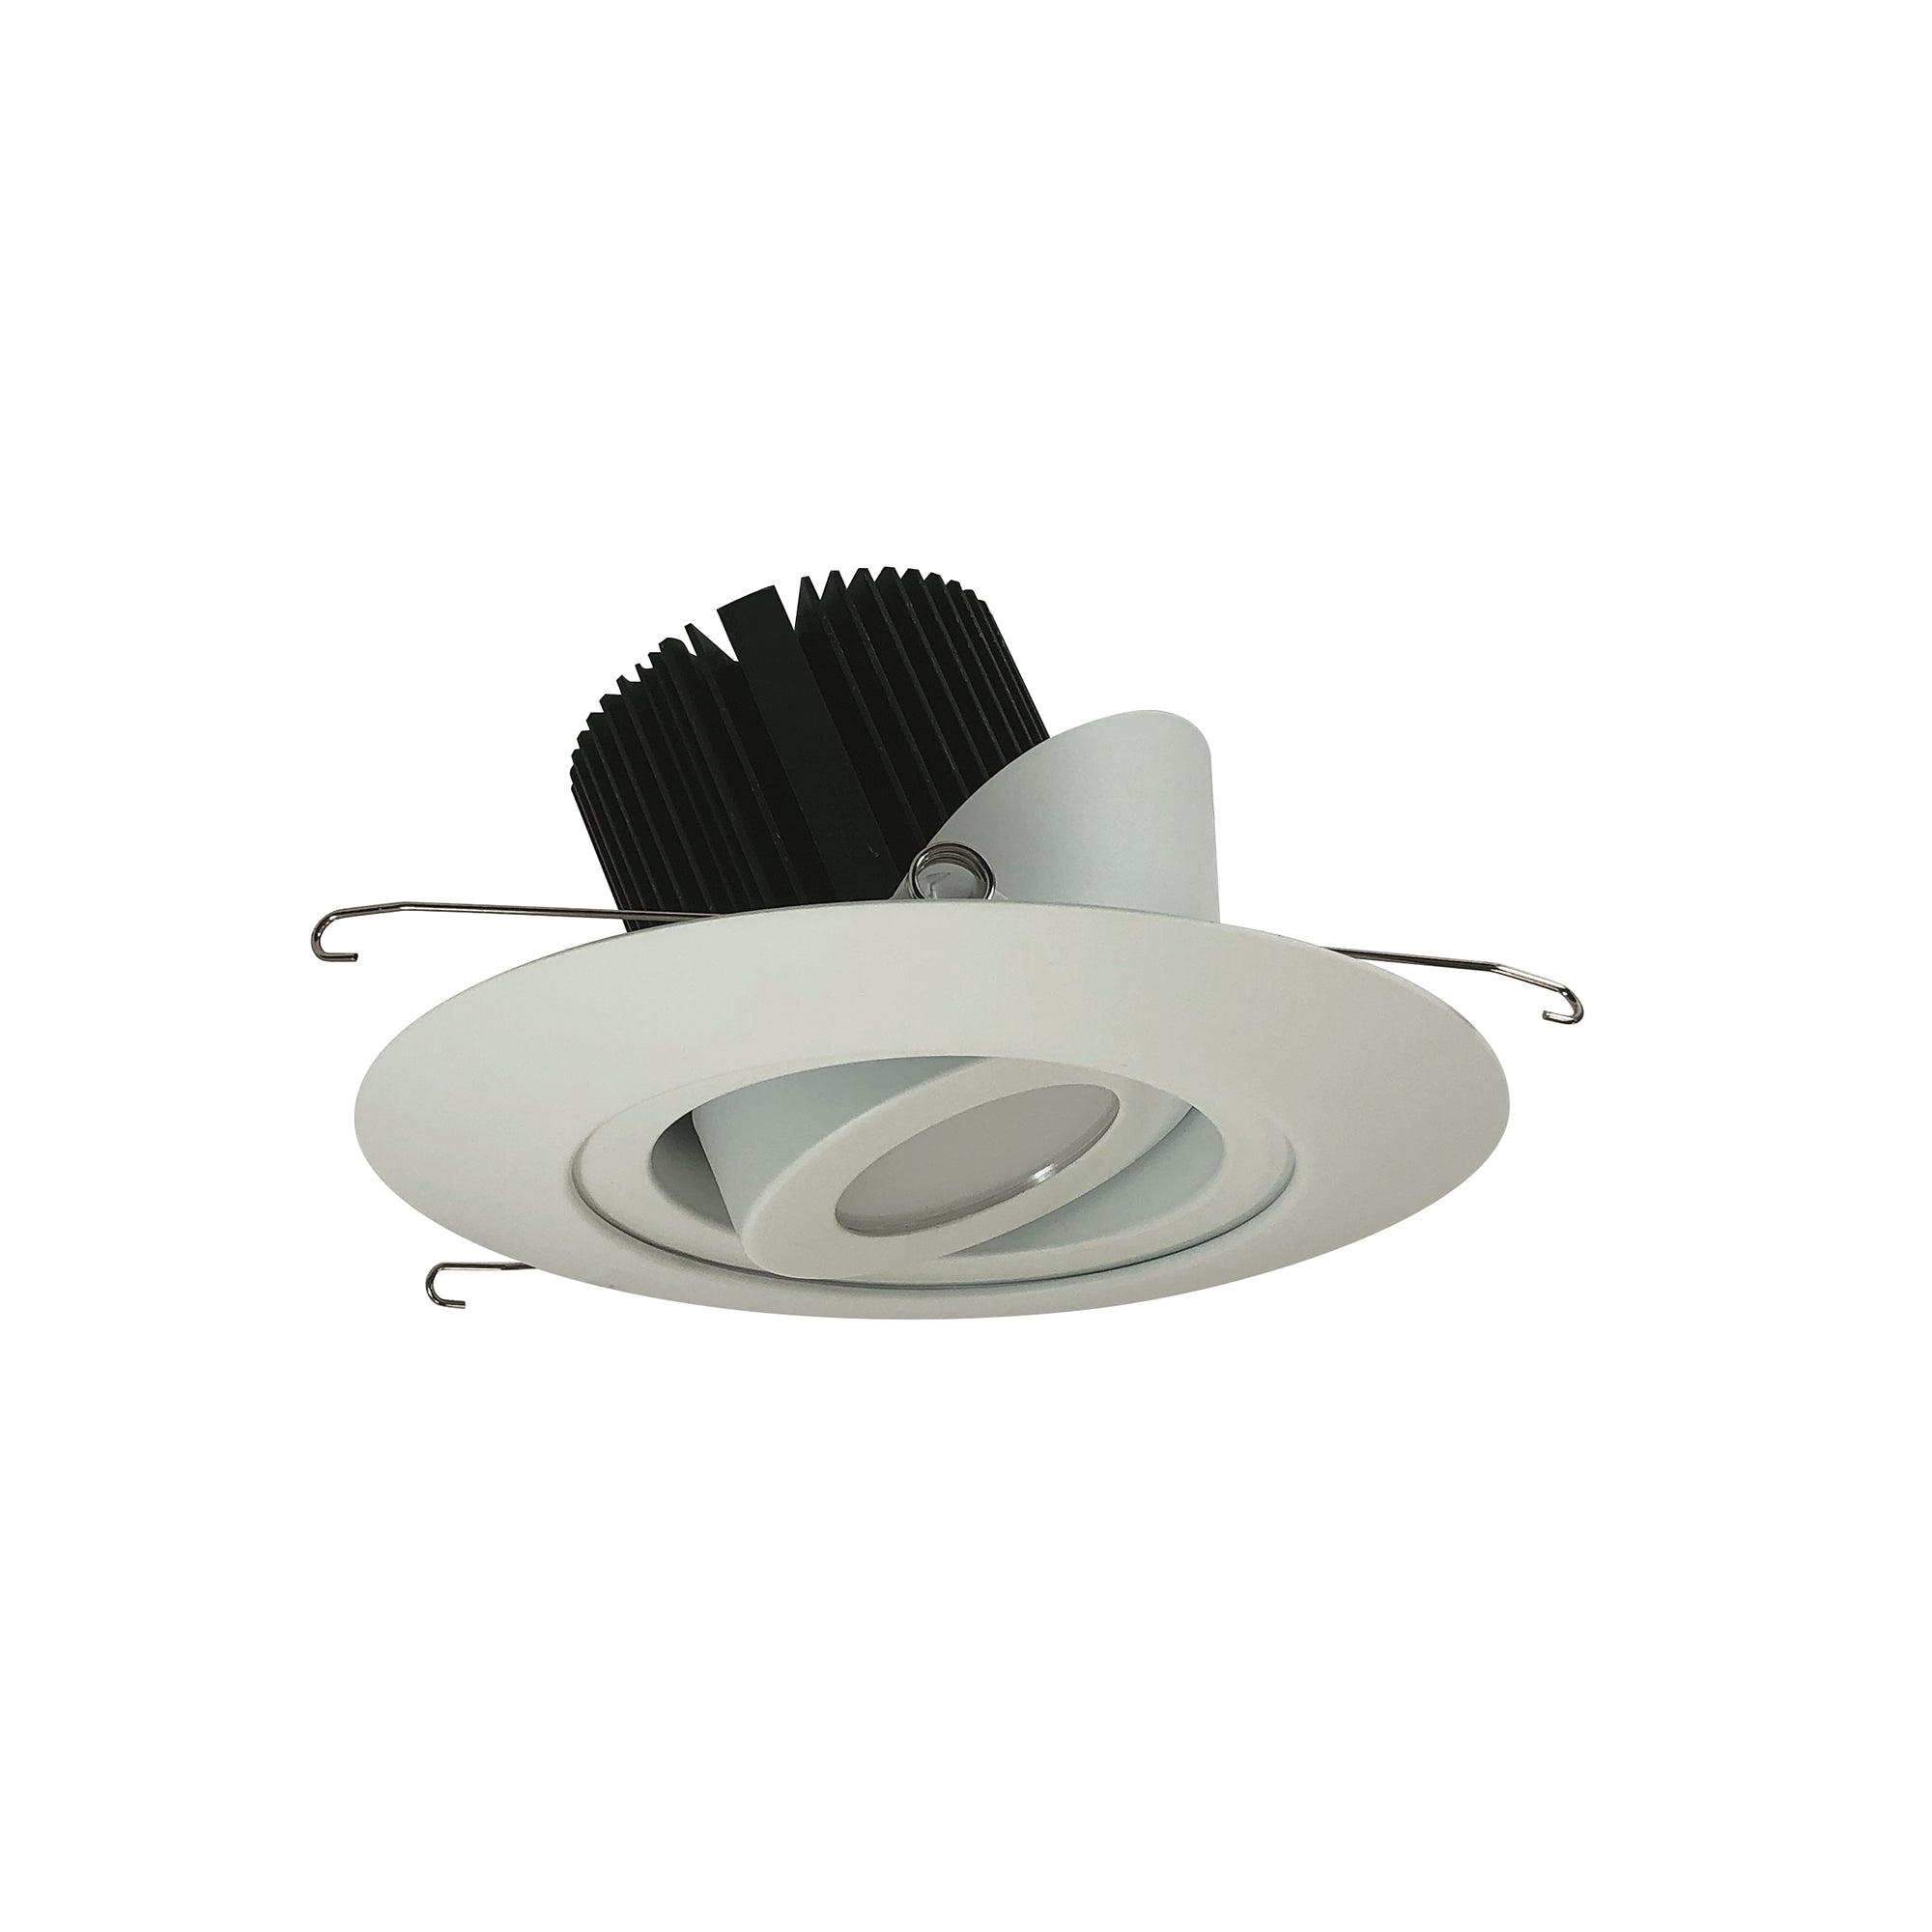 Nora Lighting NRM2-614L2527FWW - Recessed - 6 Inch Marquise II Round Surface Adjustable Trim, Flood, 2500lm, 2700K, White (Not Compatible with NHRM2-625 Housings)